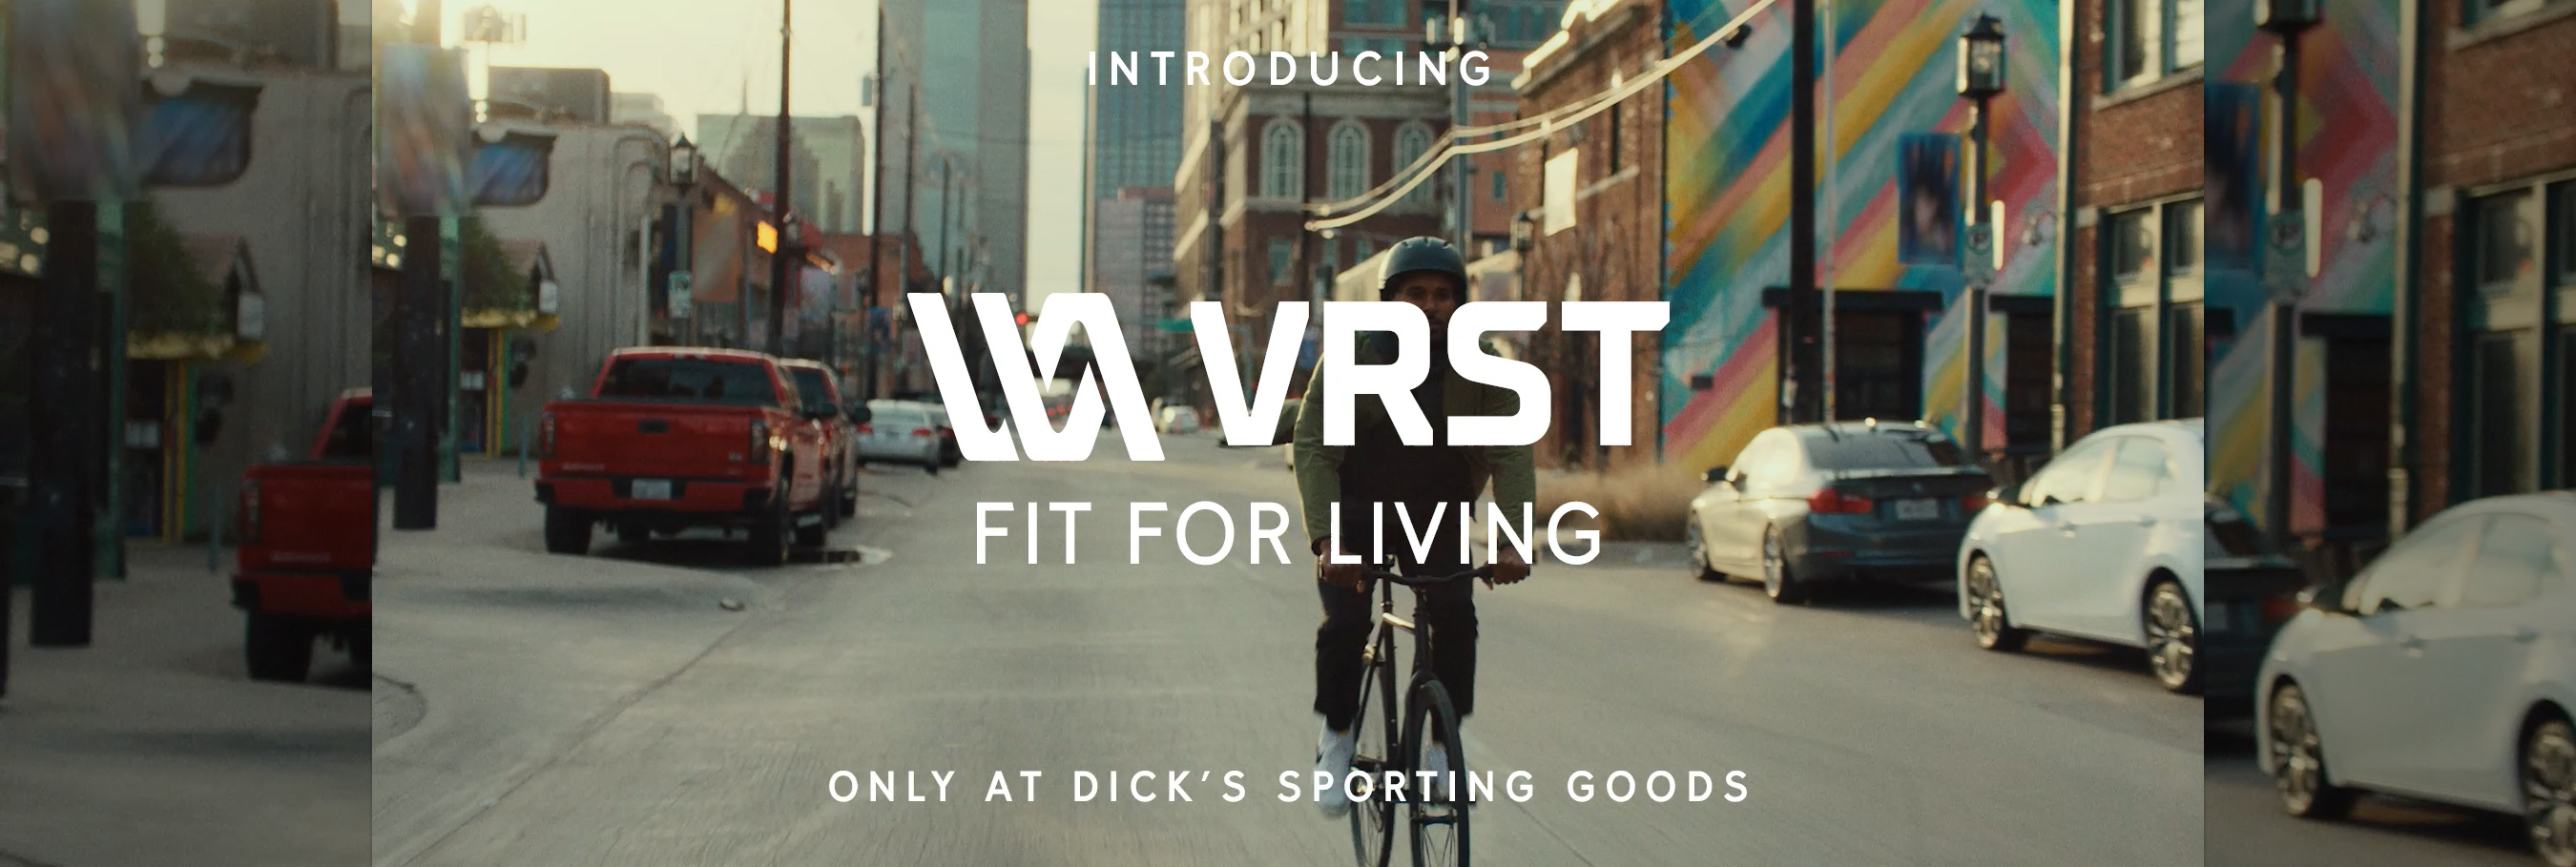 DICK’S Sporting Goods Launches “VRST” - An Exclusive, New Men’s Apparel Brand Positioned To Be A First Of Its Kind For The Company